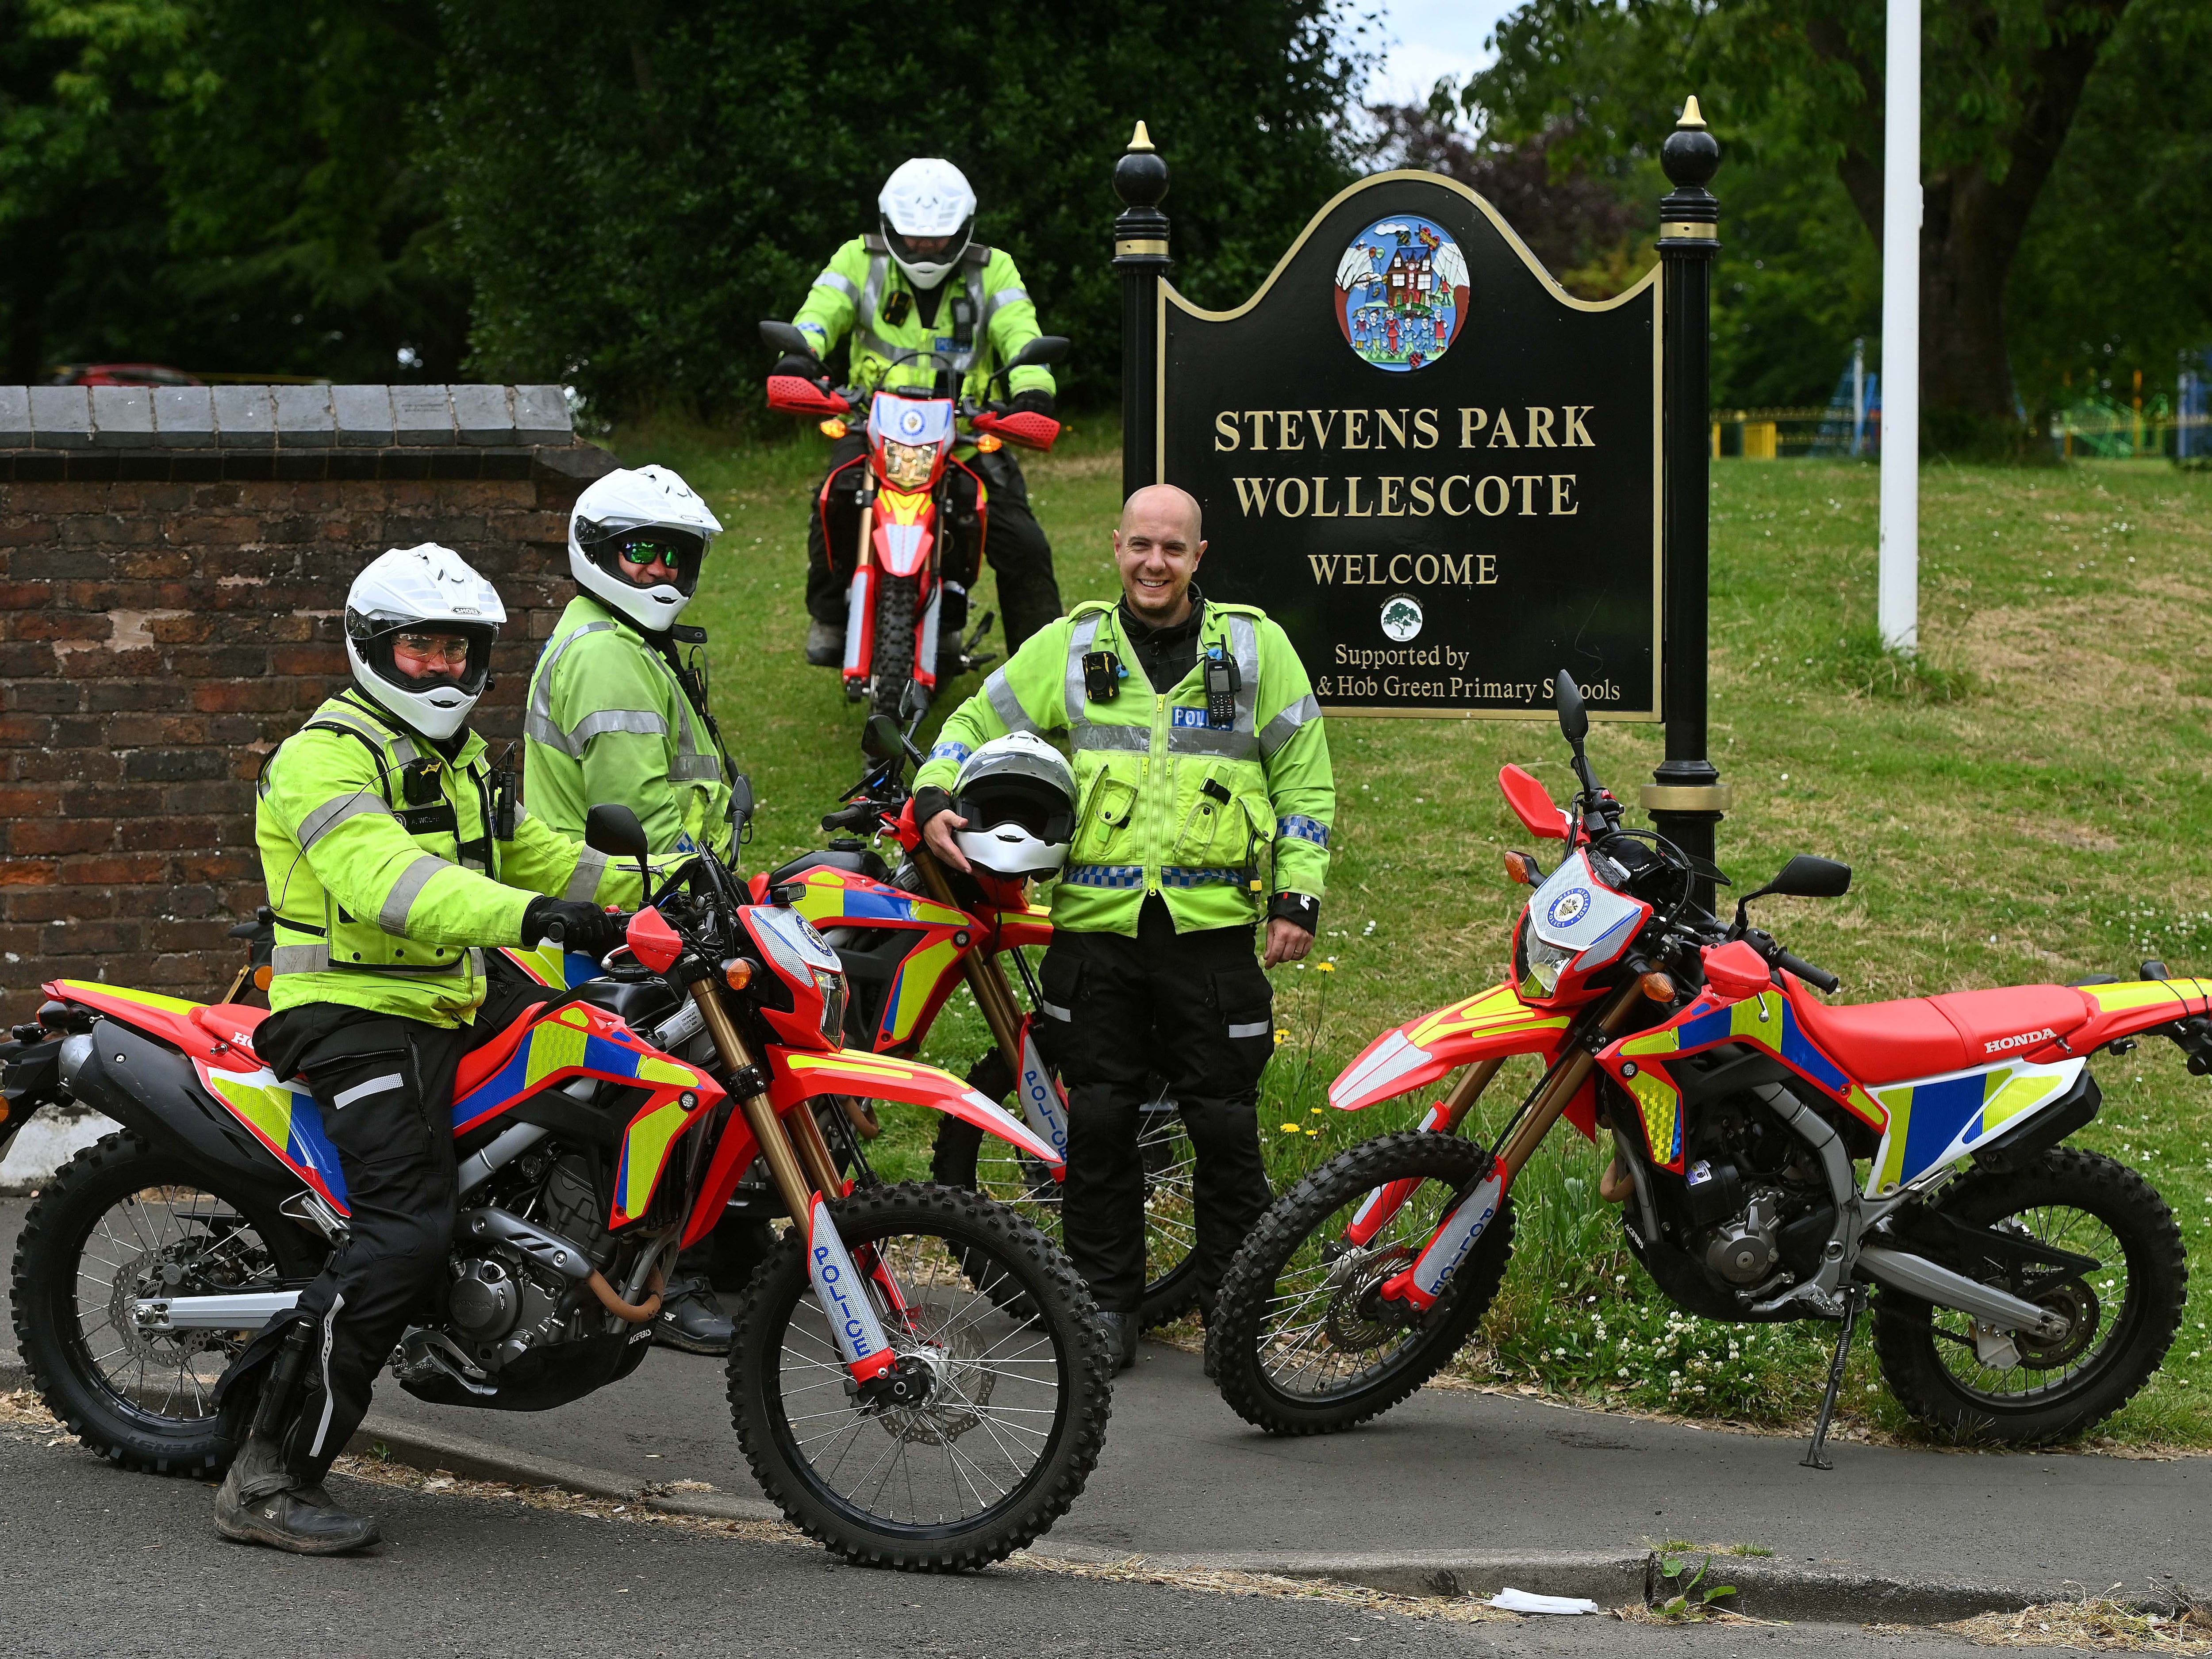 Off-road police officers help deter anti-social riders in Stourbridge in day of action